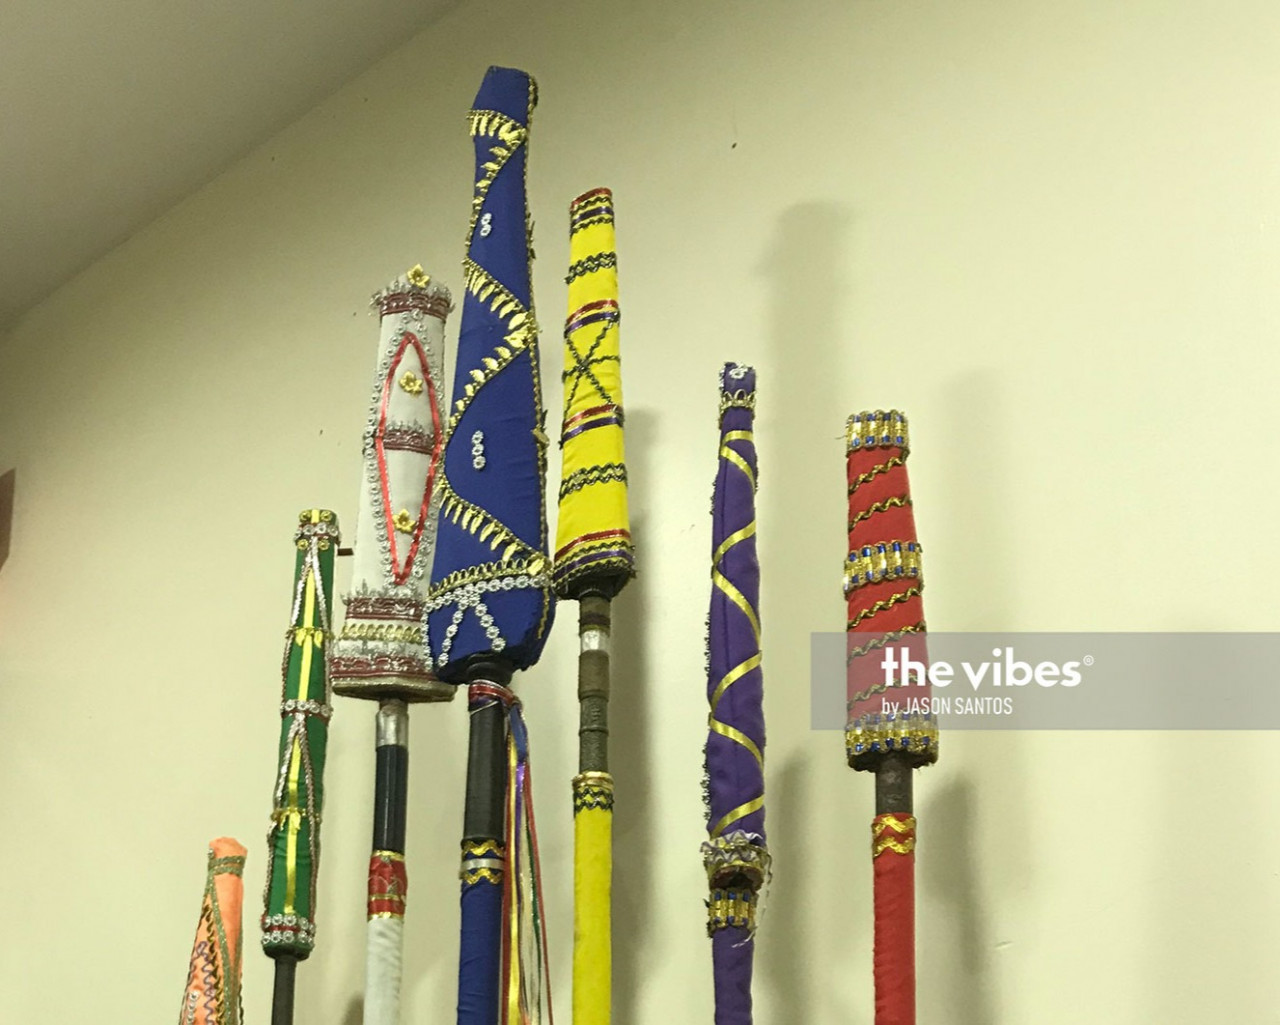 The collection of Bujaks (spears) in Bryan’s collection. – JASON SANTOS/The Vibes, December 5, 2020